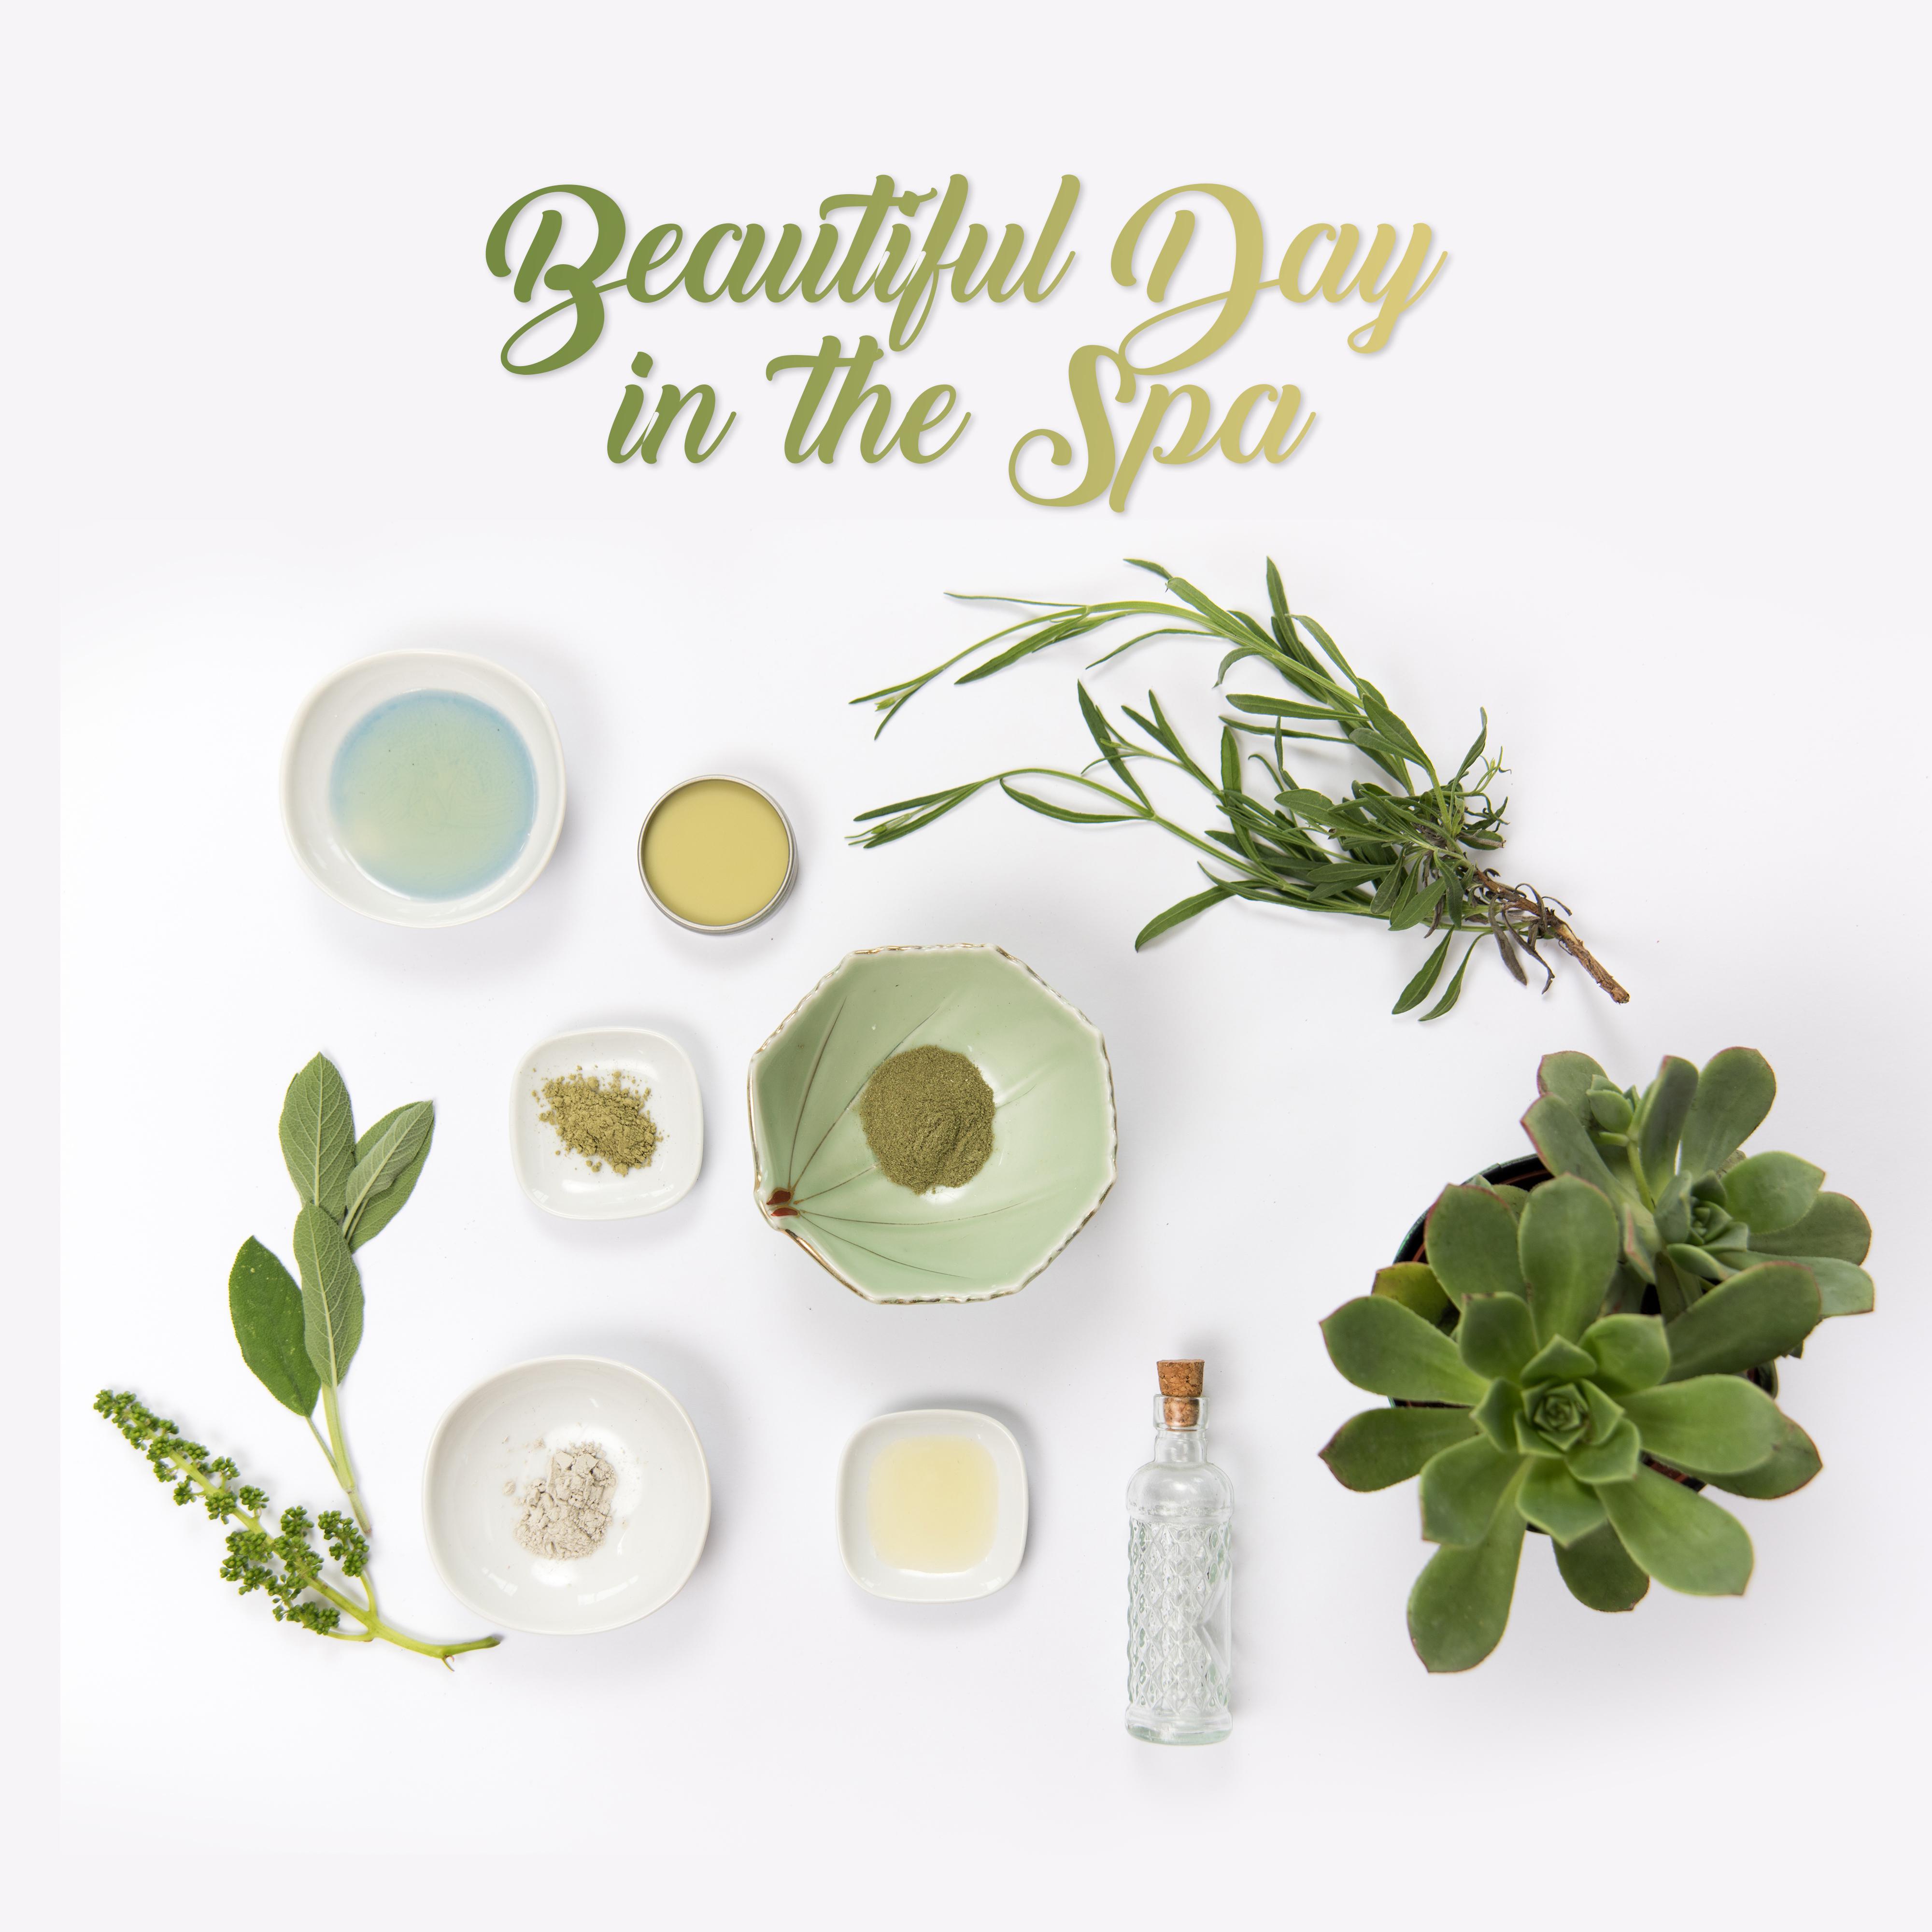 Beautiful Day in the Spa: Collection of Relaxing 2019 New Age Music Created for Spa Salon, Wellness Massage Therapy, Most Relaxing Sounds to Full Calm Down & Rest